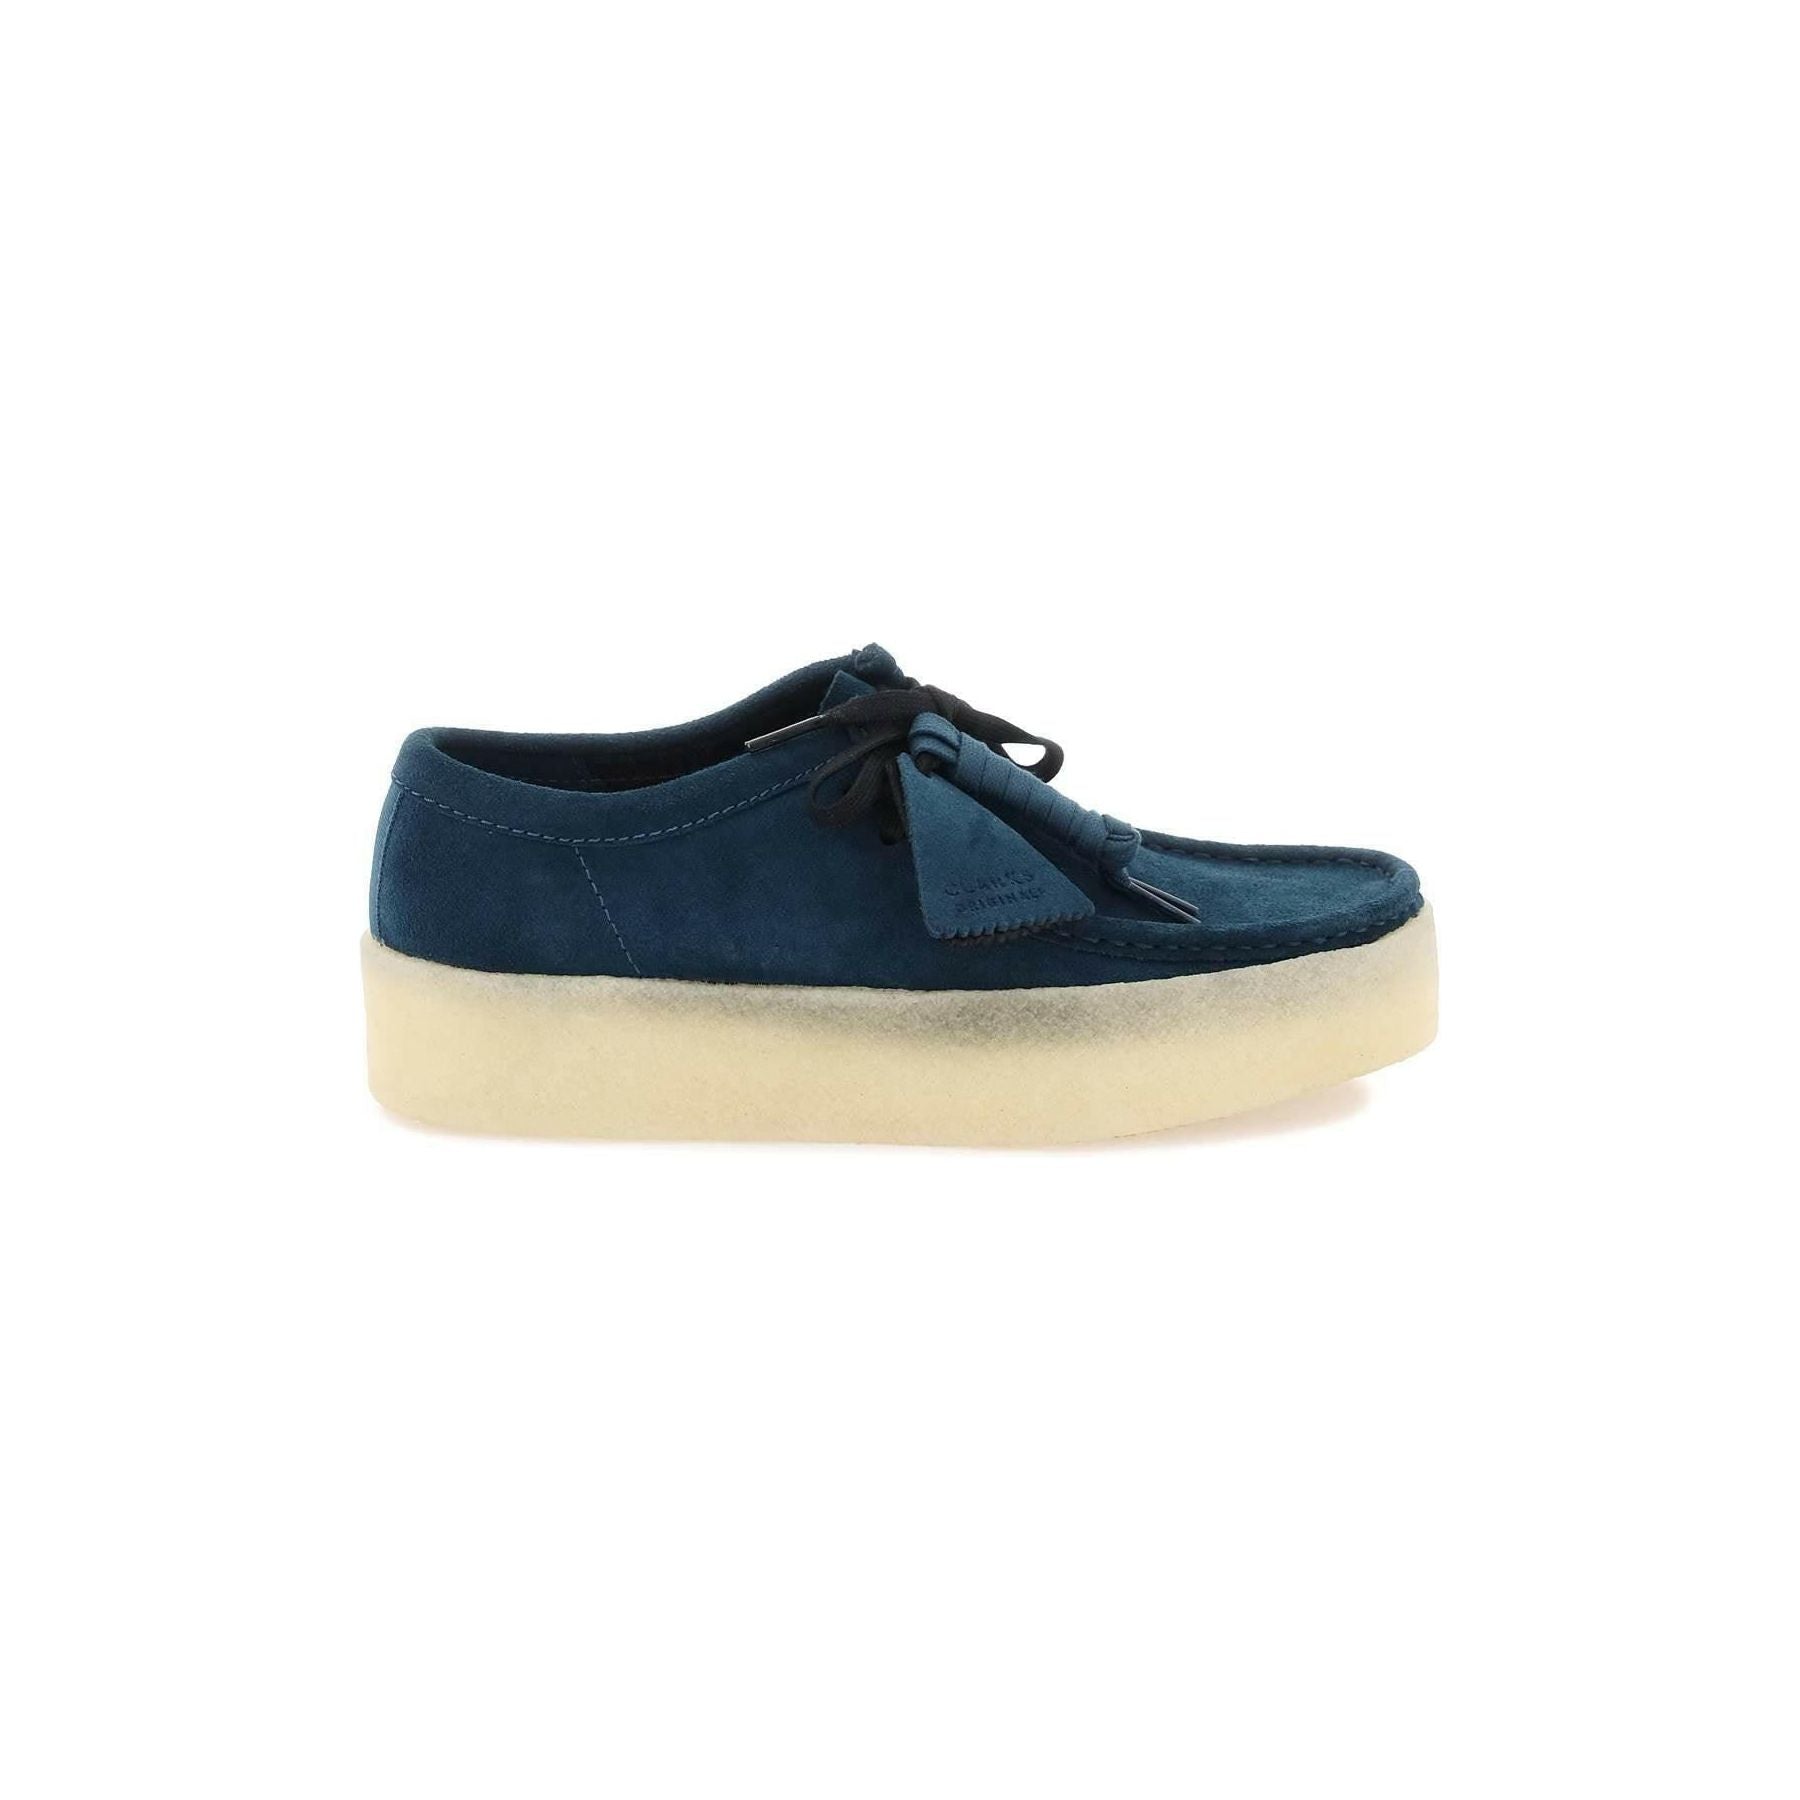 Wallabee Cup Lace Up Shoes CLARKS JOHN JULIA.